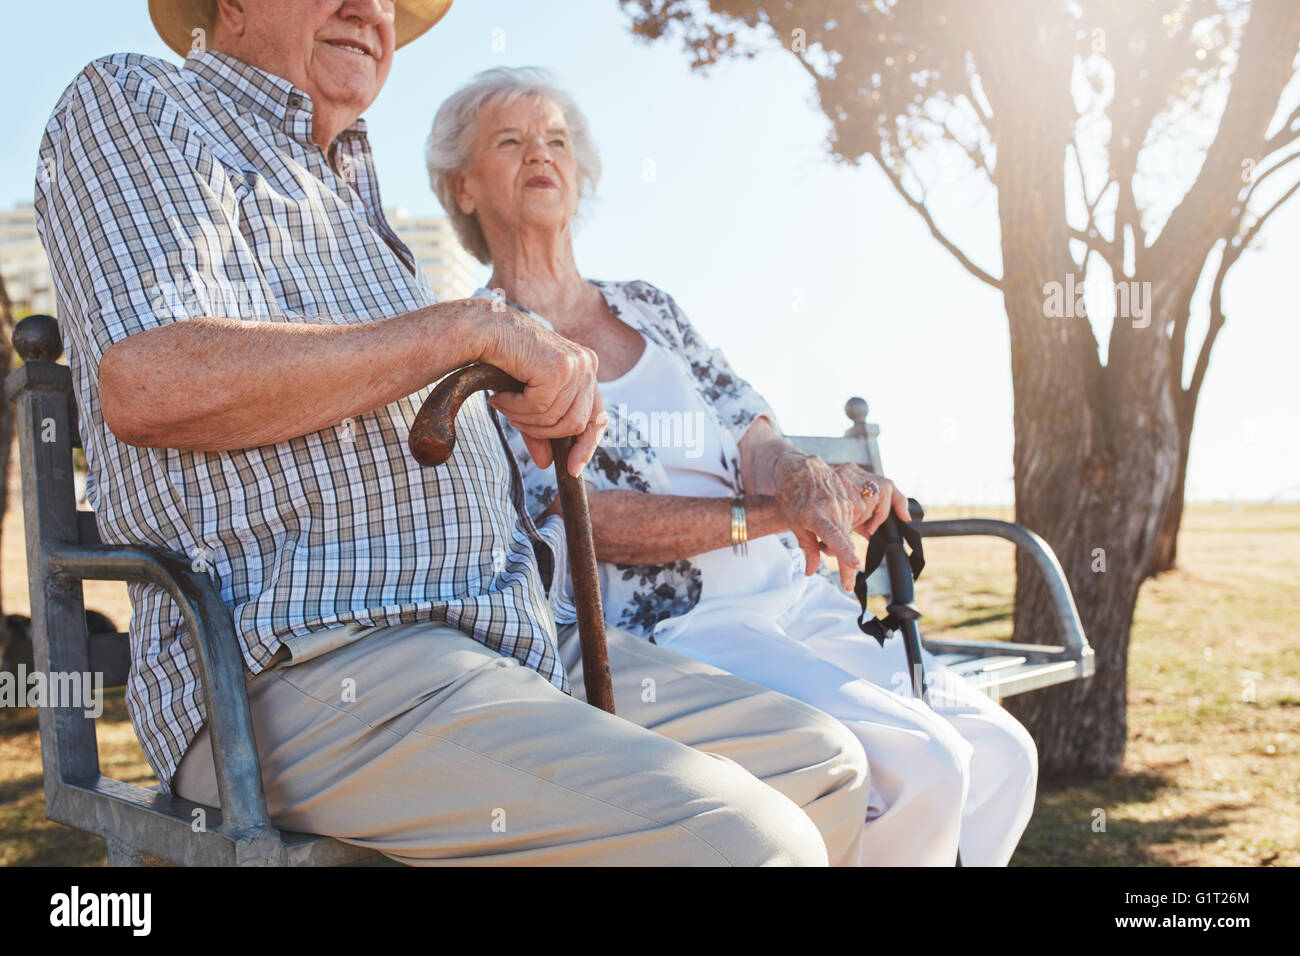 Senior couple sitting on a park bench with walking stick. Elderly couple relaxing outdoors on a summer day. Stock Photo